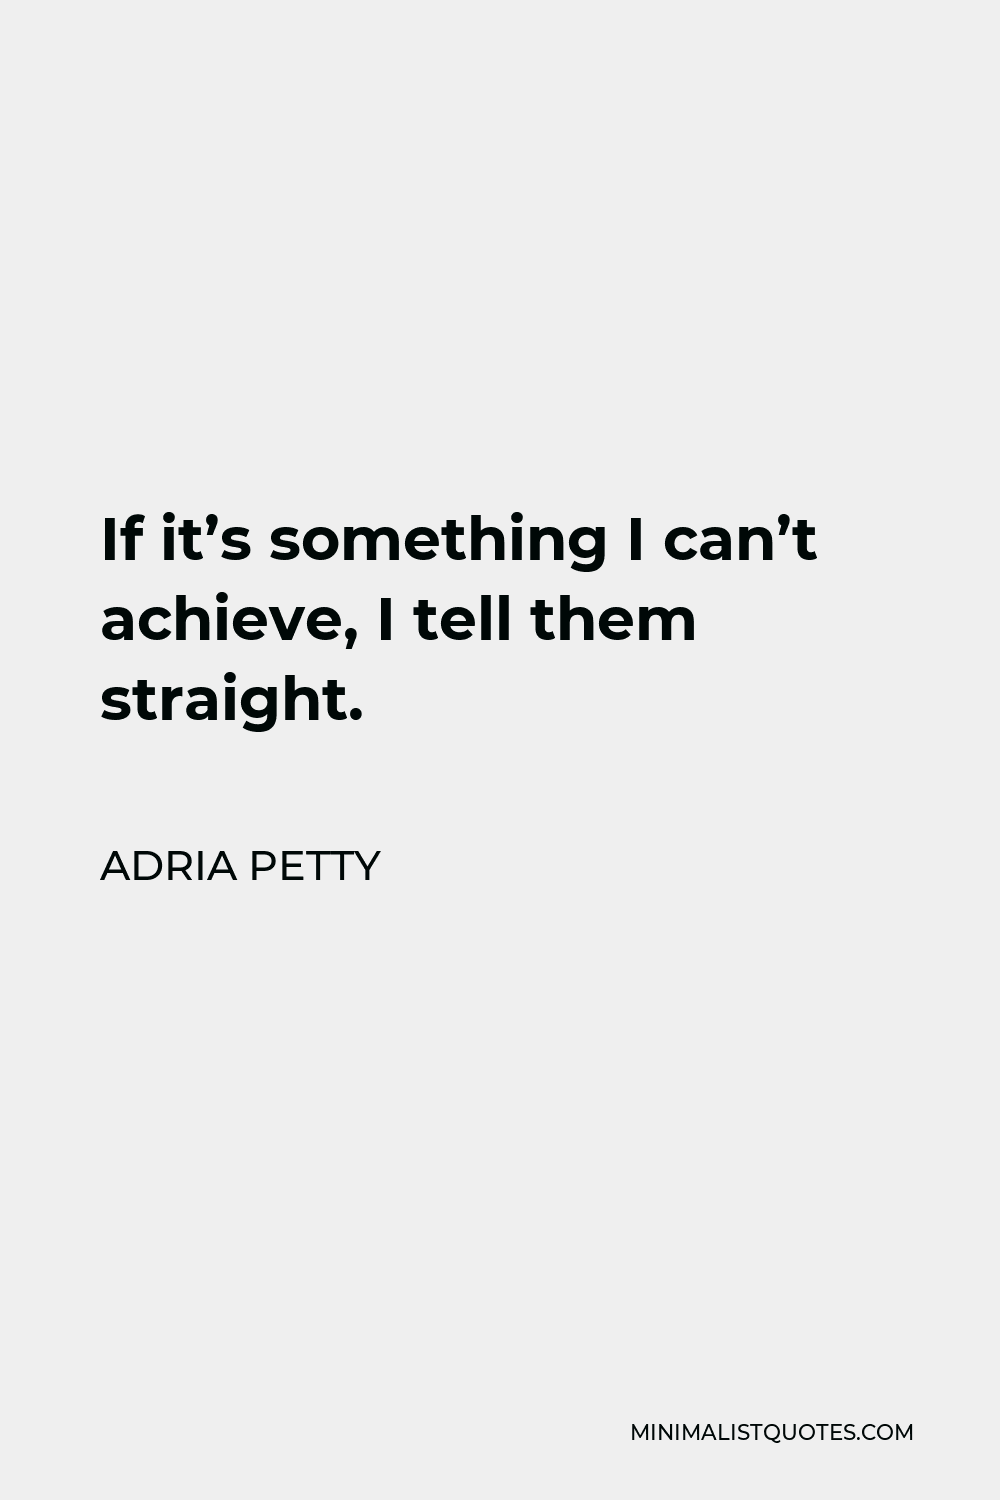 Adria Petty Quote - If it’s something I can’t achieve, I tell them straight.